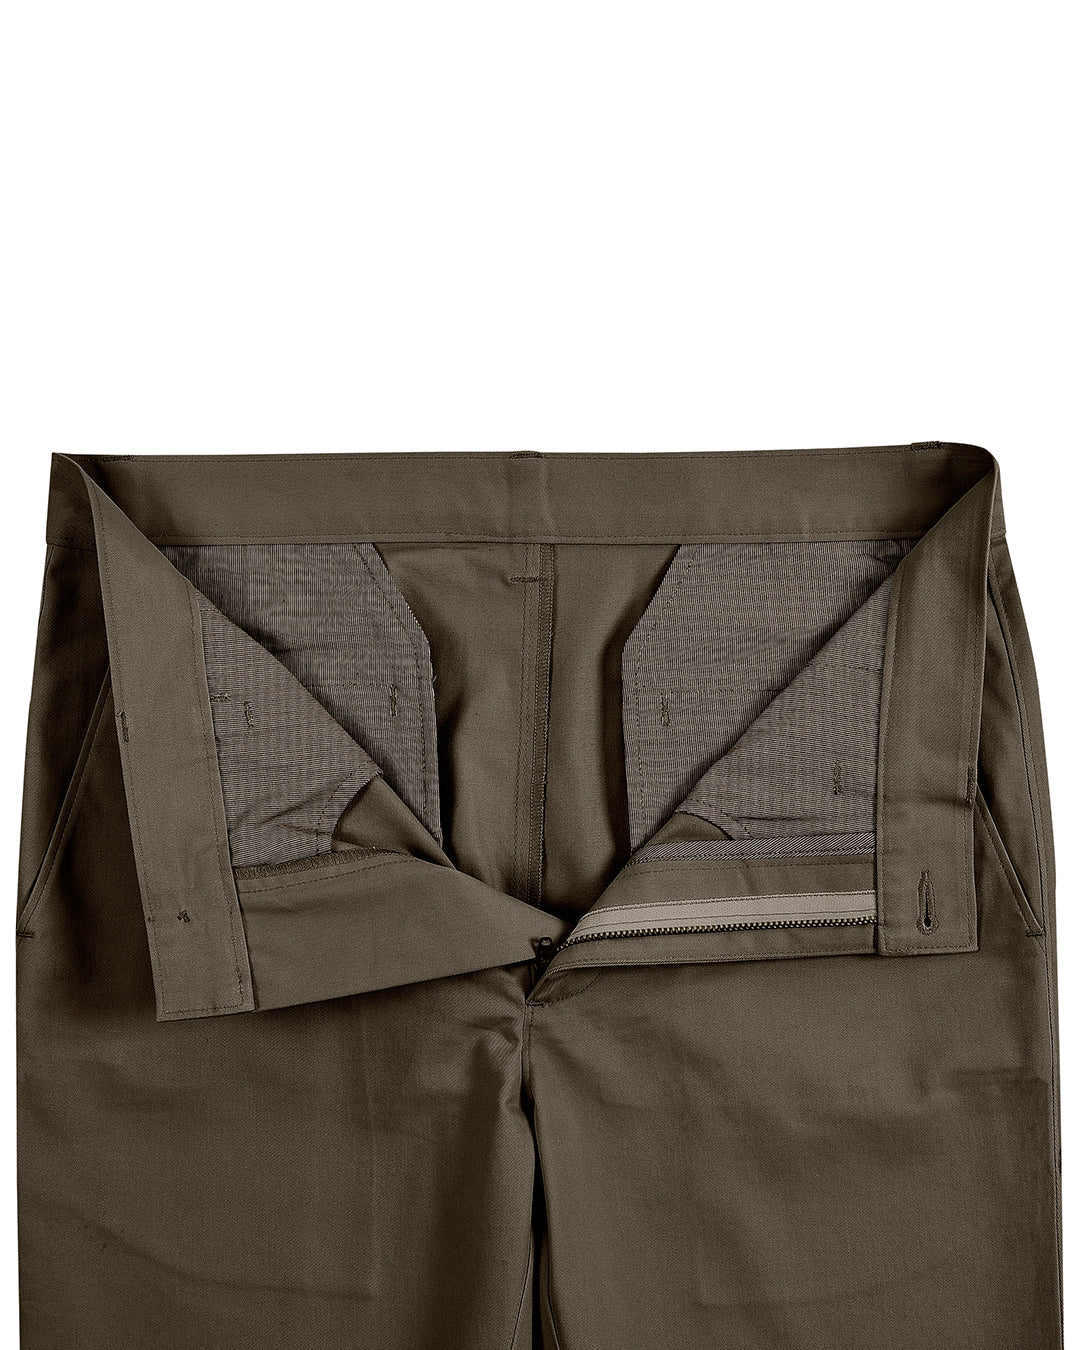 Front open view of custom Genoa Chino pants for men by Luxire in khaki brown